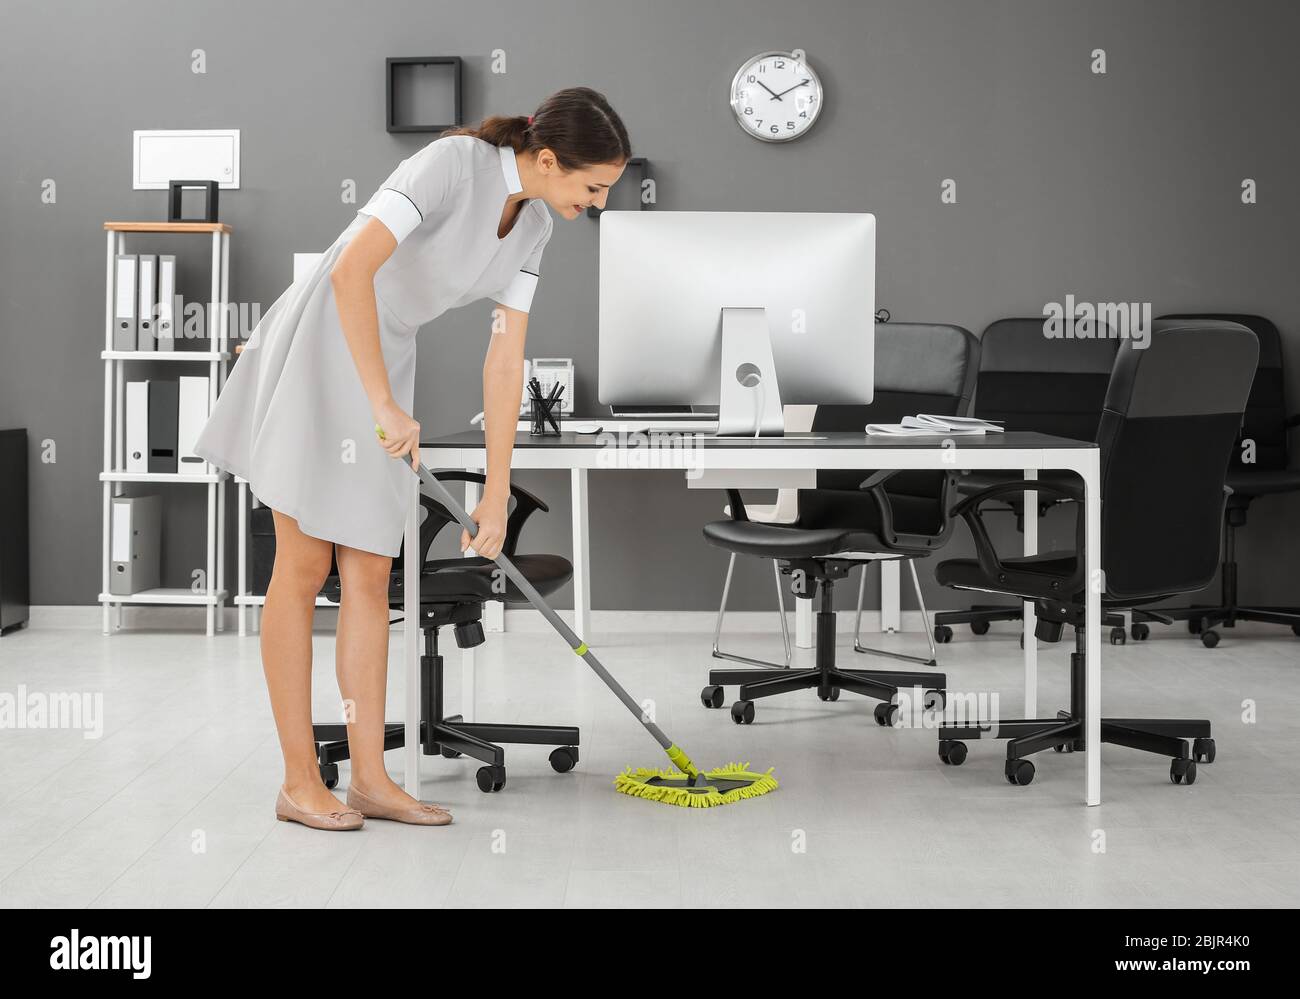 Young woman mopping floor in office Stock Photo